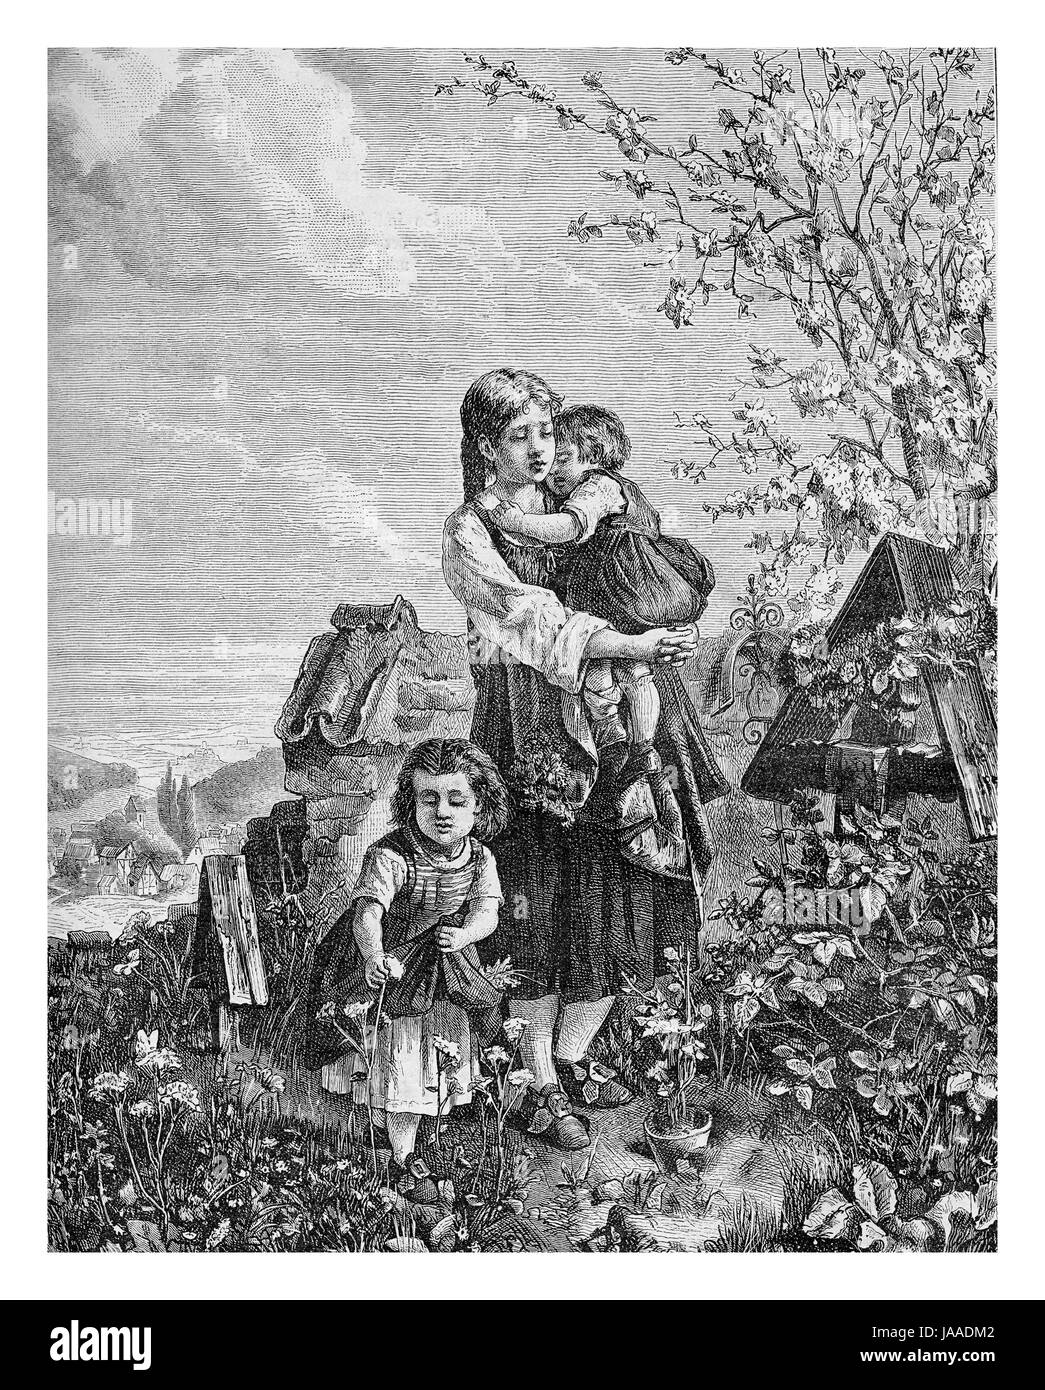 Orfan girls visit the Mother's grave, engraving from XIX century Stock Photo